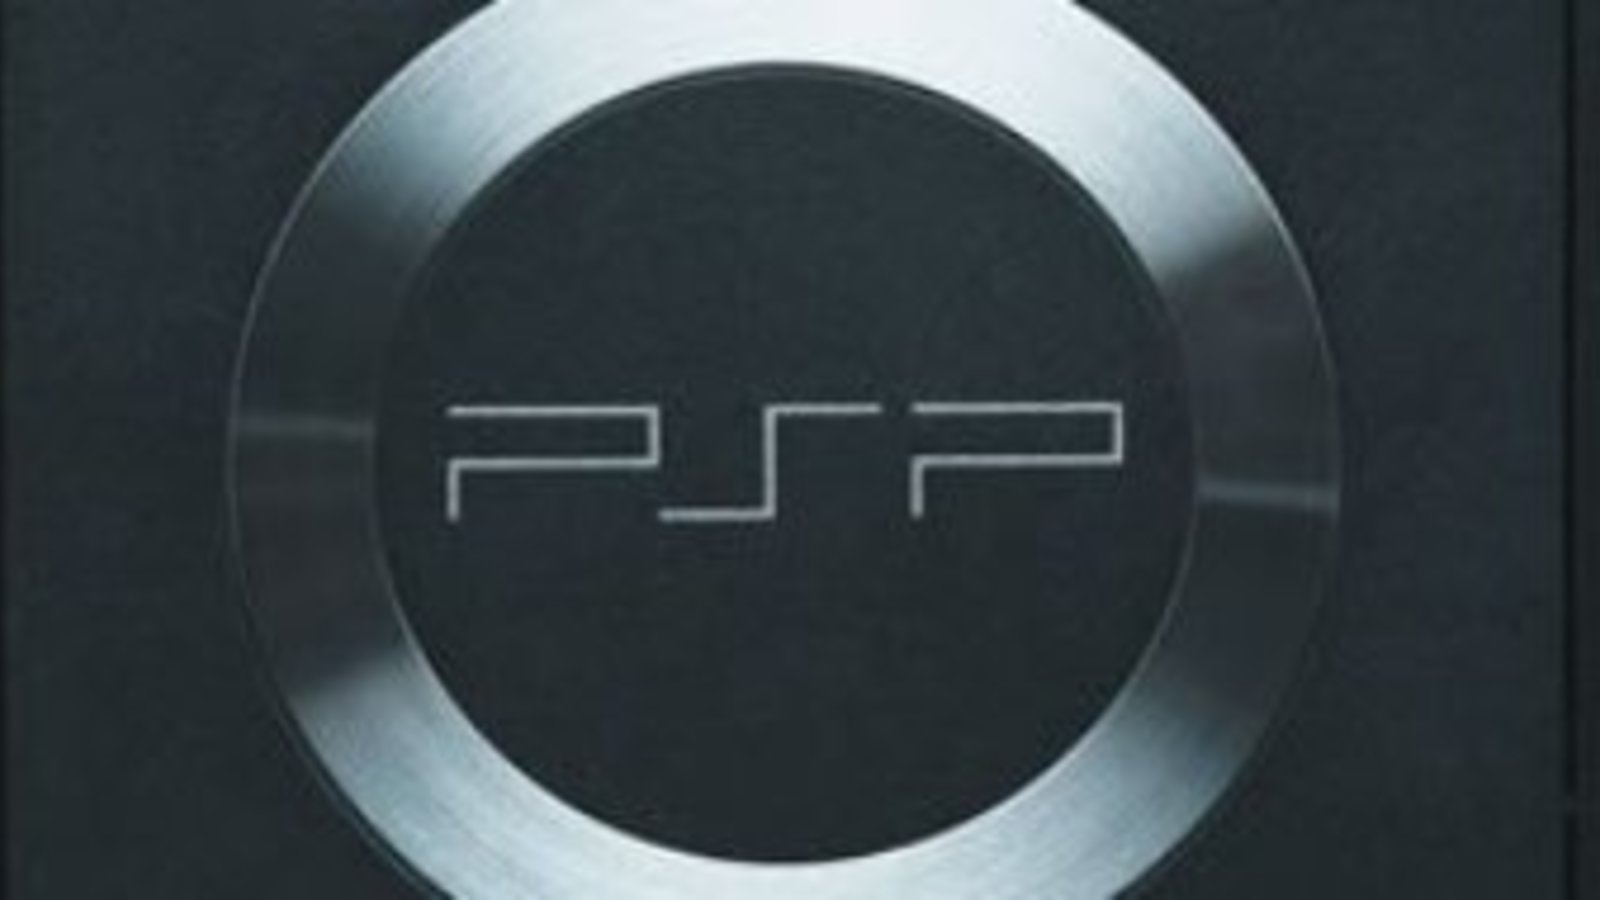 Sony Introduces Engine For Psp To Ps3 HD Ports Vg247